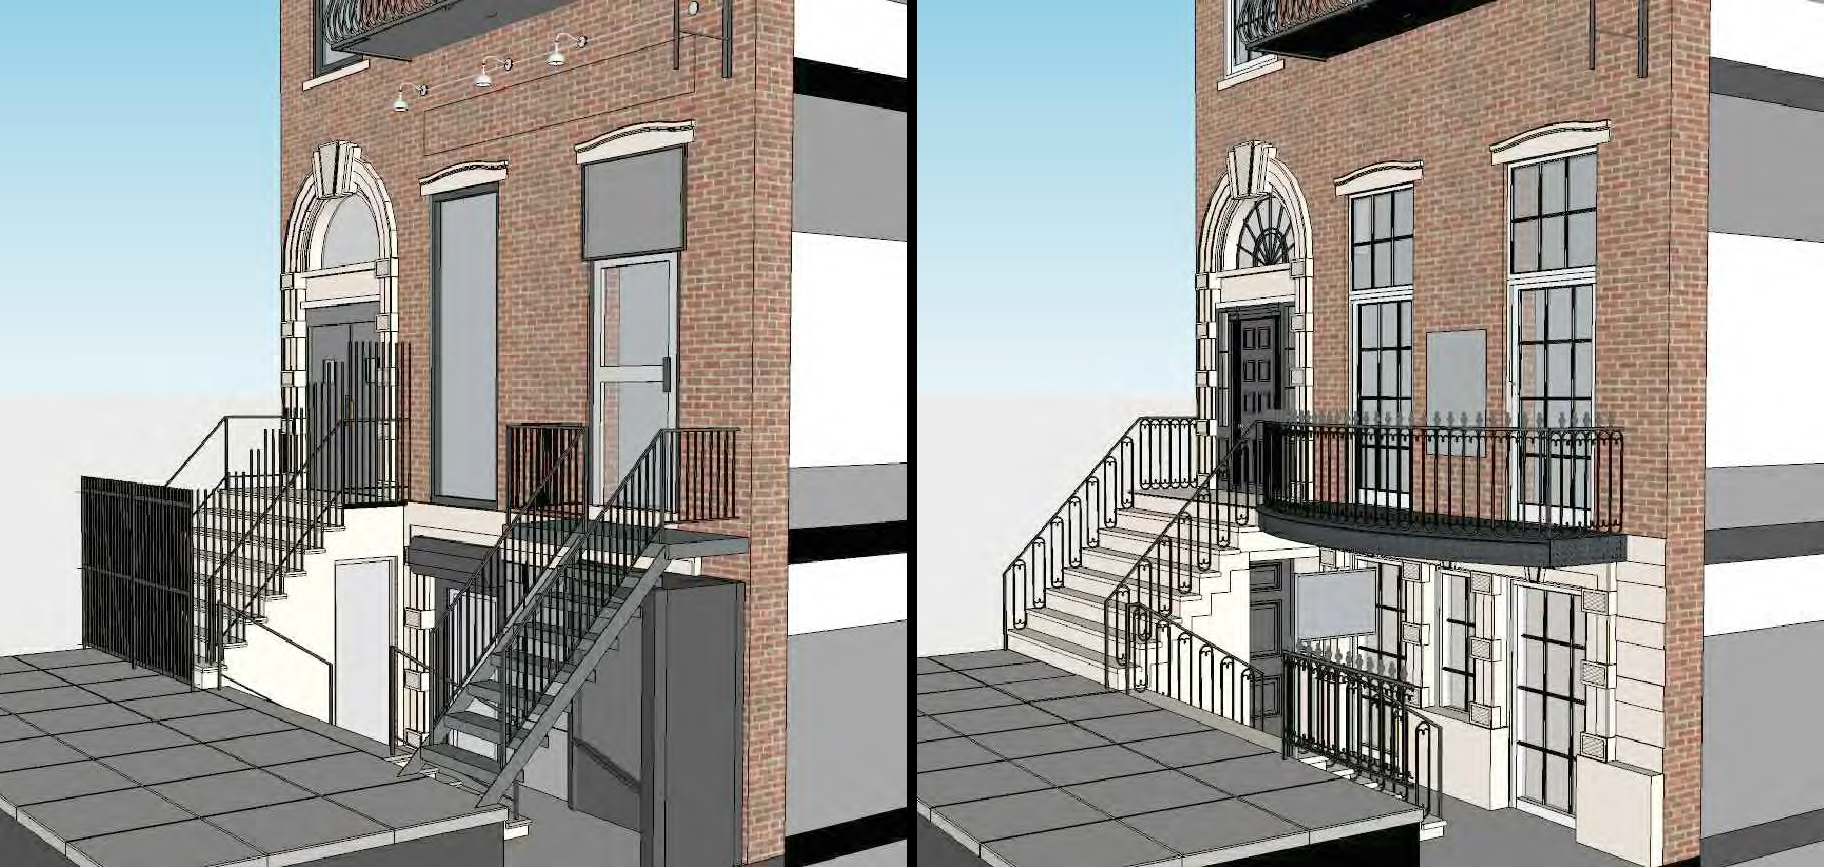 Ground and first floor of the Hamilton-Holly House, existing and proposed